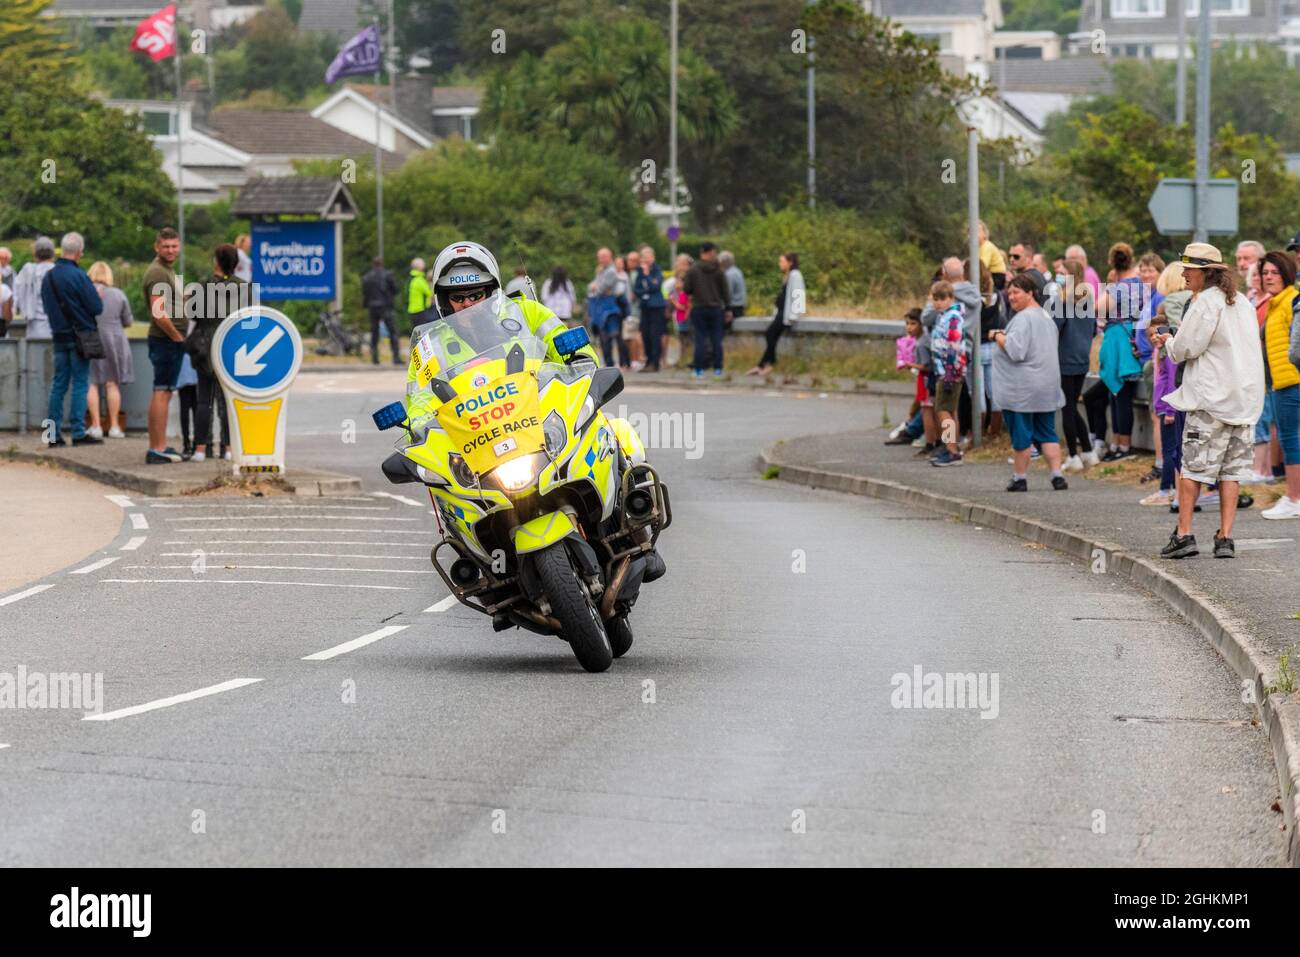 A polic patrol motorcyclist riding into Newquay in Cornwall during the opening stage of the iconic Tour of Britain 2021 - known as The Grand Depart. Stock Photo